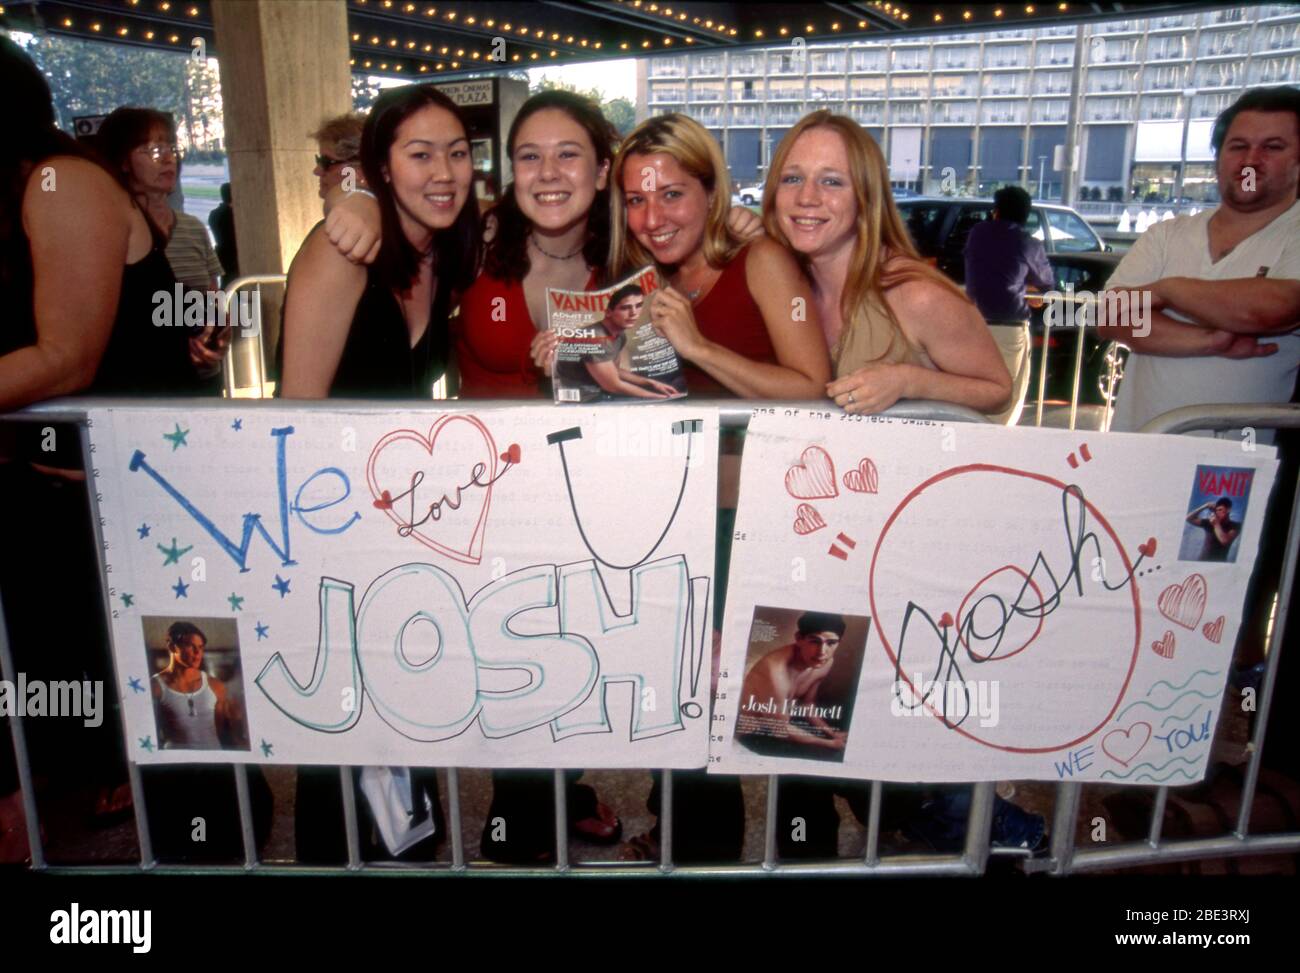 Teen age fans of actor Josh Hartnett with home made signs and a copy of Vanity Fair magazine with Josh on the cover at the premiere of the movie adaption of Hamlet in Century City, Los Angeles, CA Stock Photo